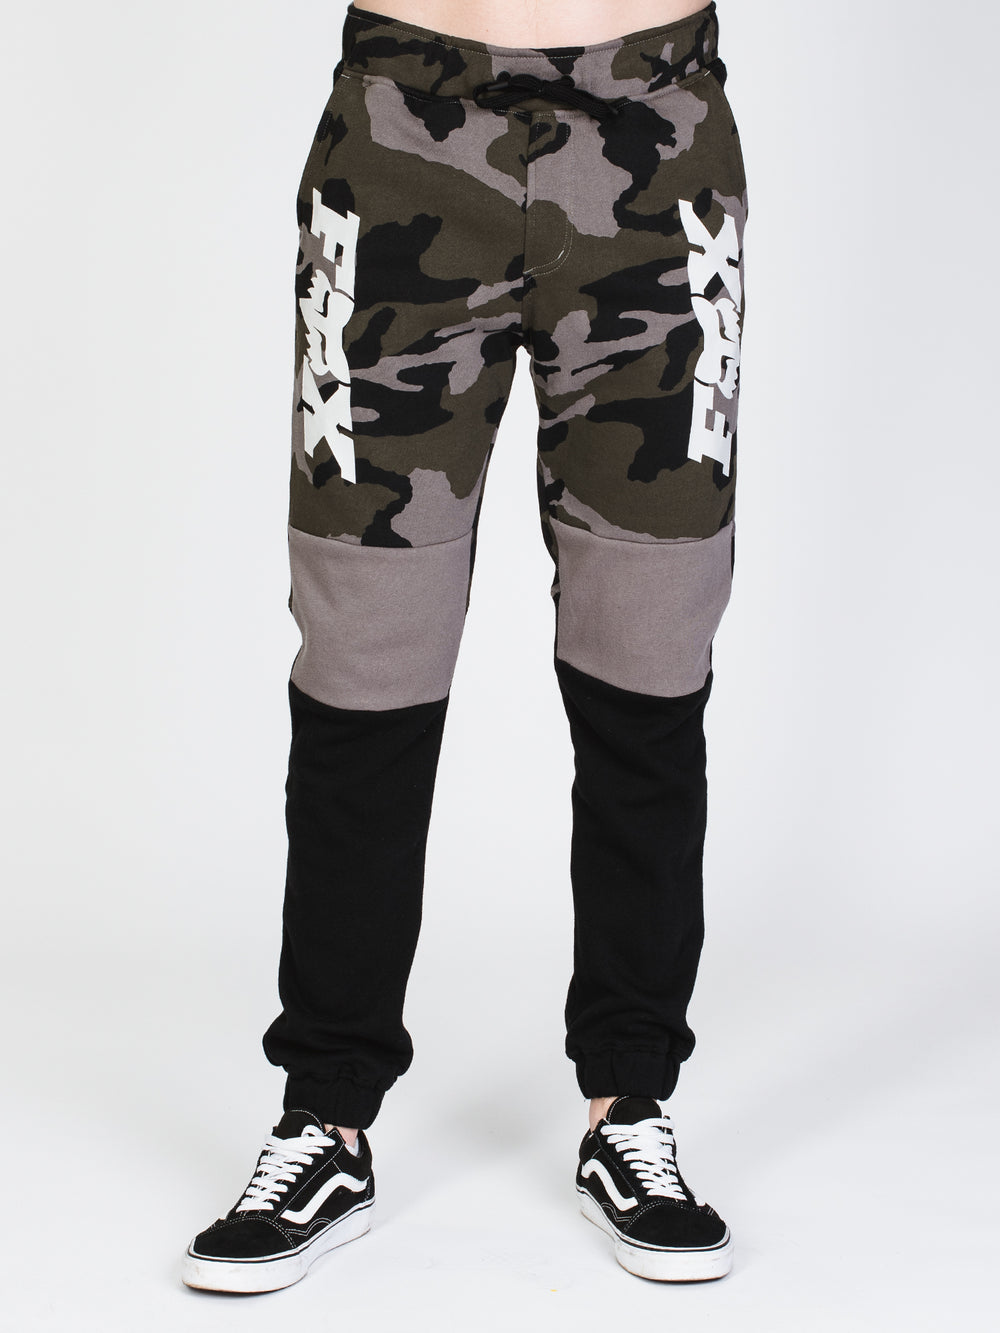 MENS LATERAL MOTO PANT - CAMO - CLEARANCE